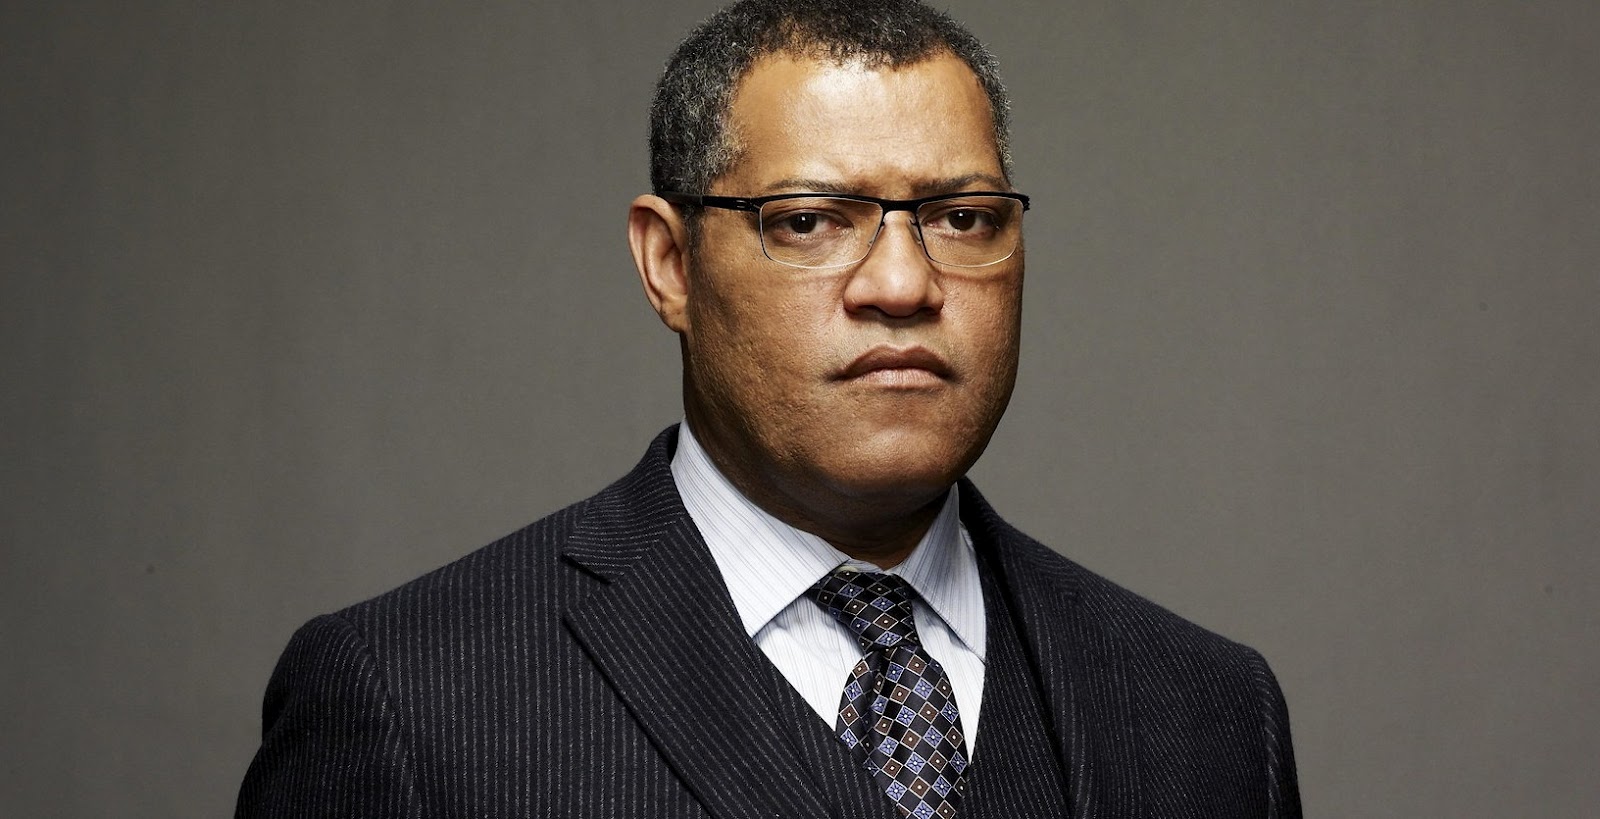 Men Background Laurence Fishburne Wallpaper By Ron Walsey